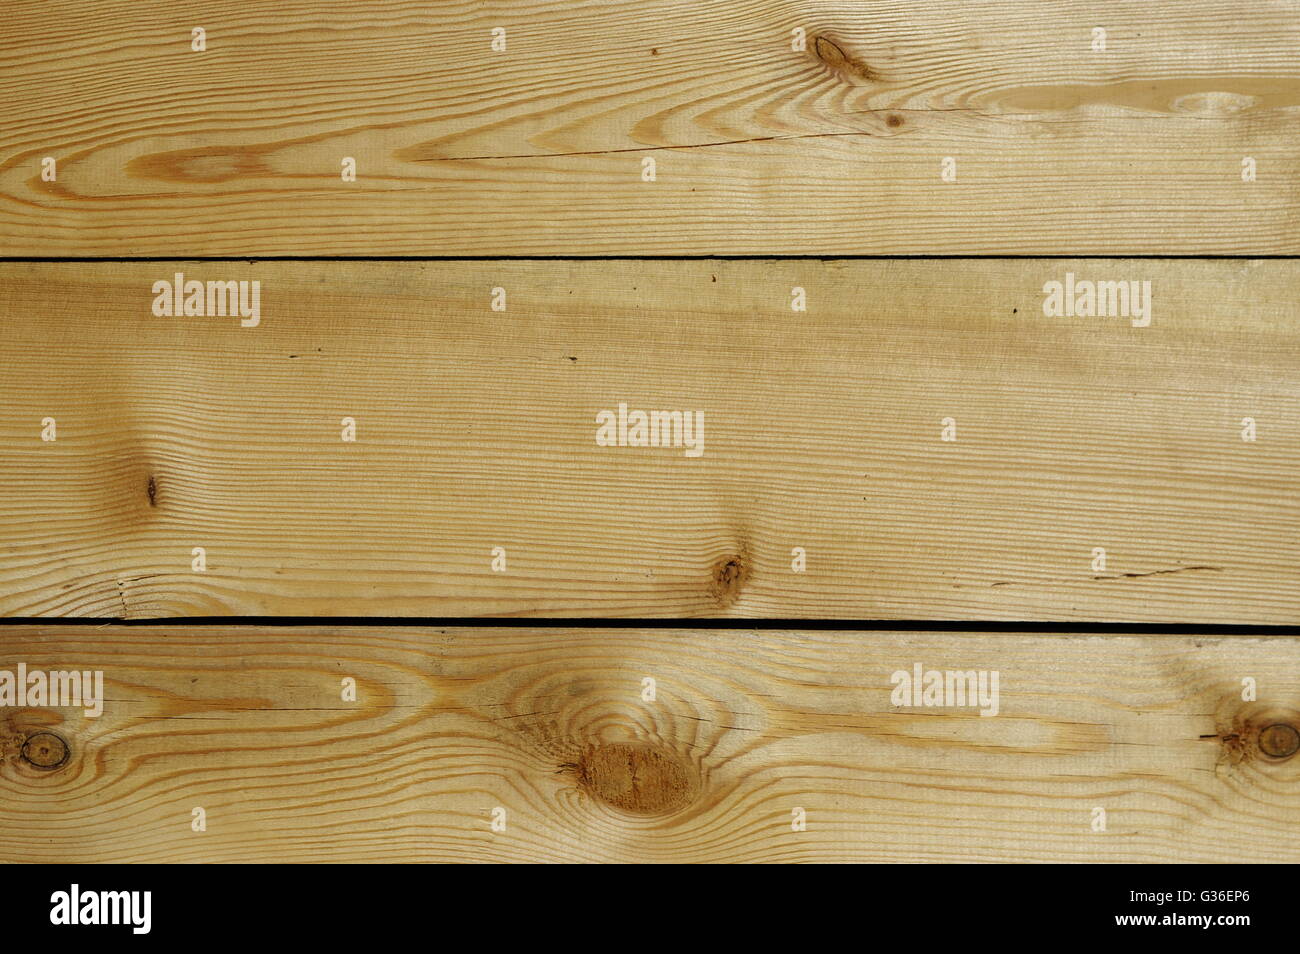 Wooden floor with spruce, planed boards with knots. Stock Photo